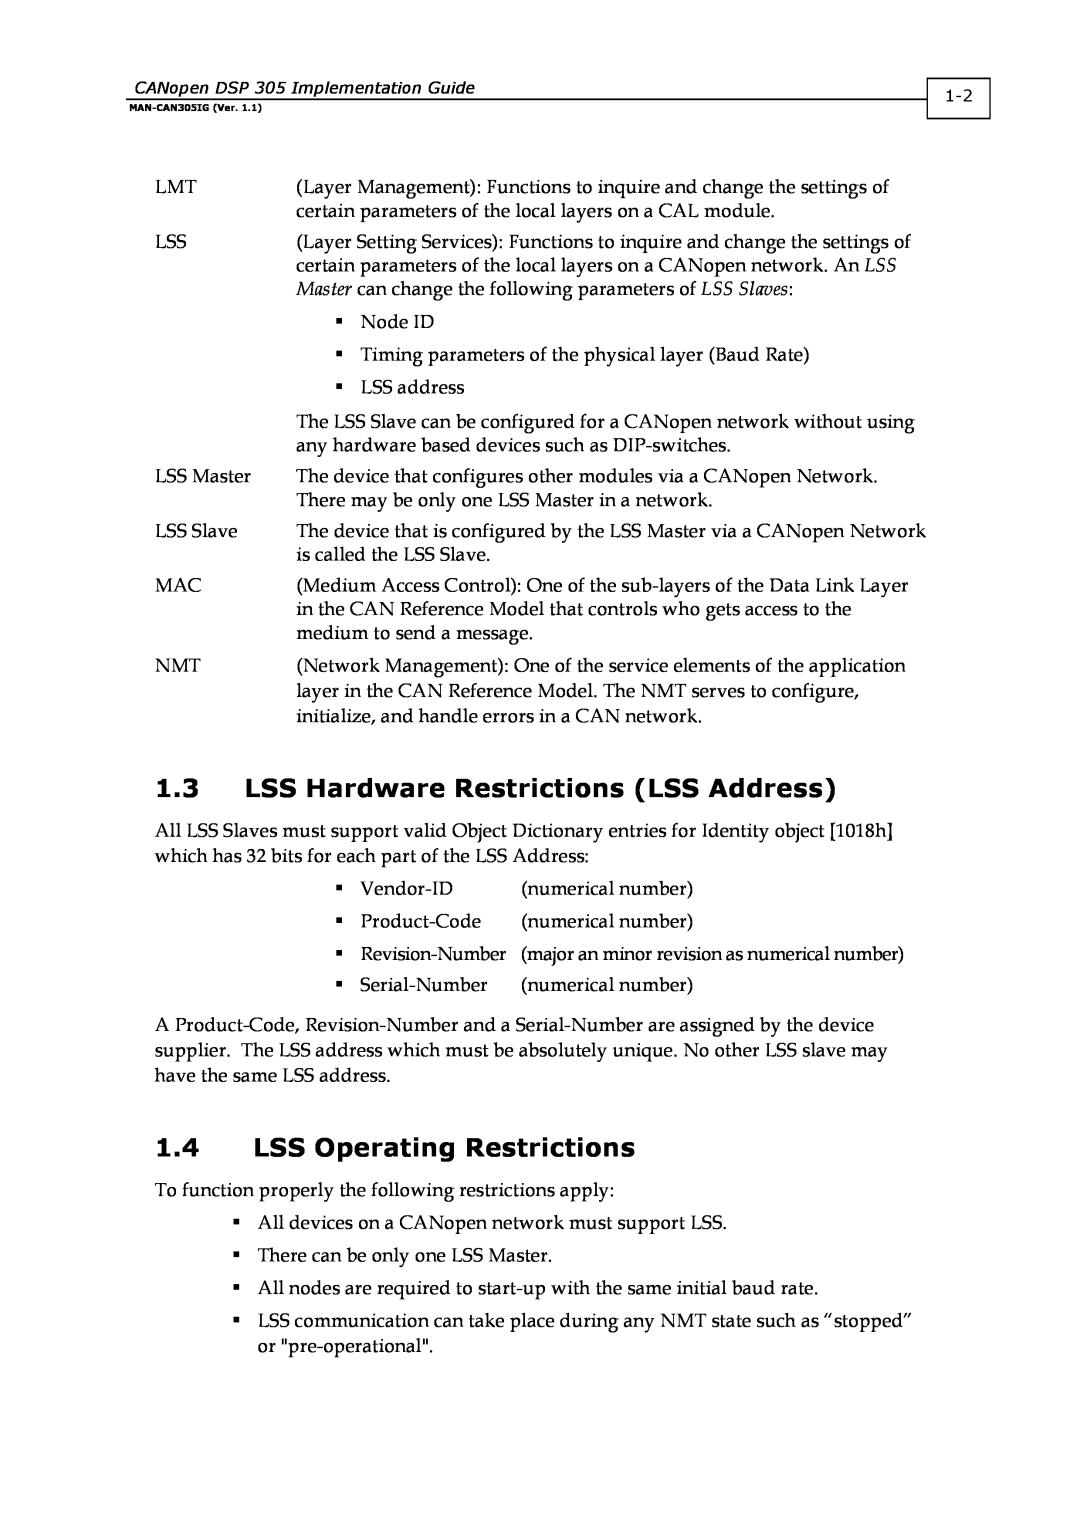 Elmo DSP 305 manual 1.3LSS Hardware Restrictions LSS Address, 1.4LSS Operating Restrictions 